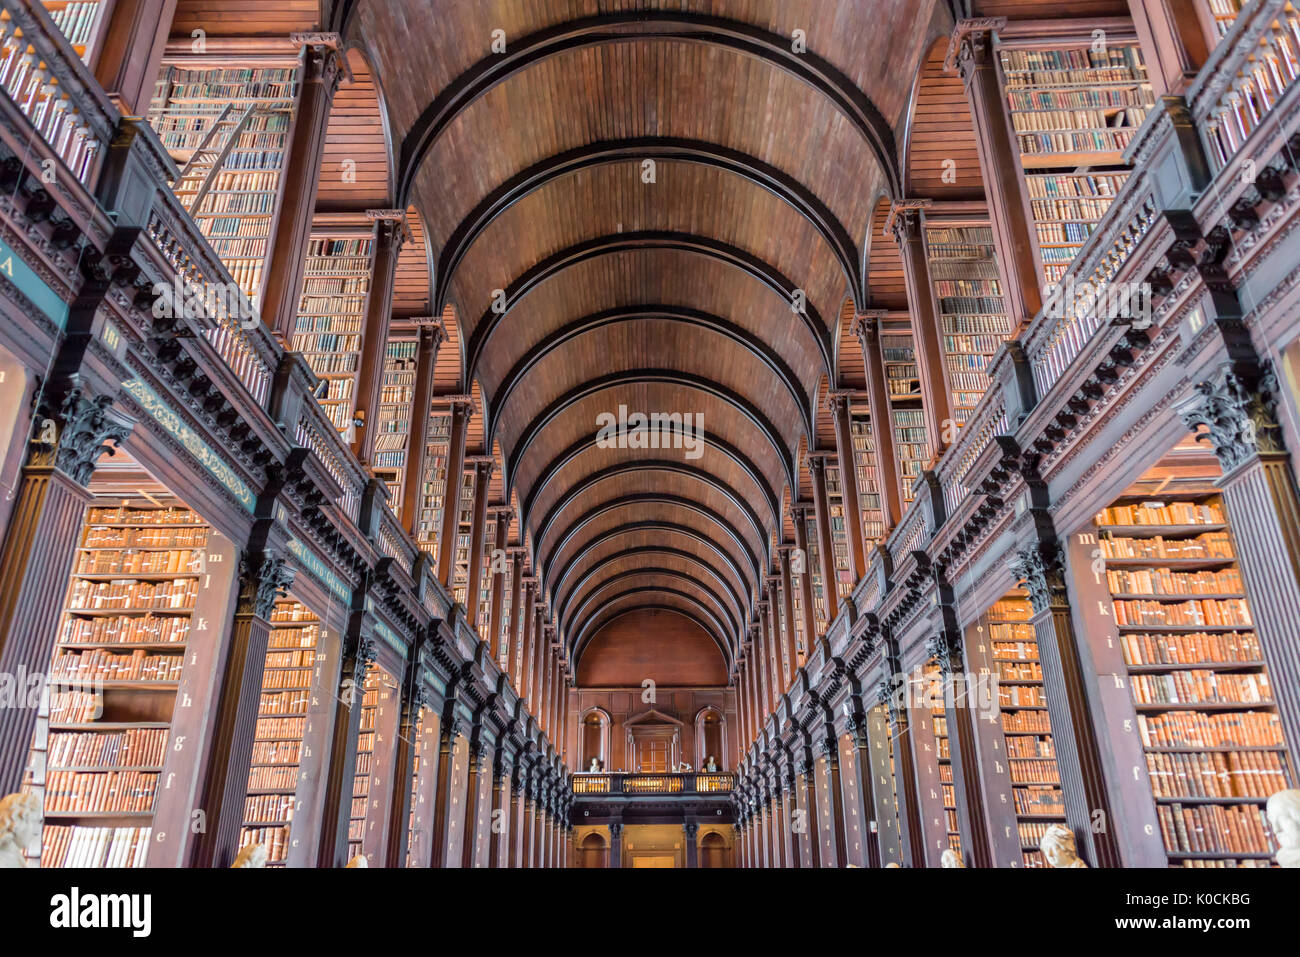 DUBLIN, IRELAND - AUGUST 13: The Long Room in the Trinity College Old Library in Dublin, Ireland Stock Photo